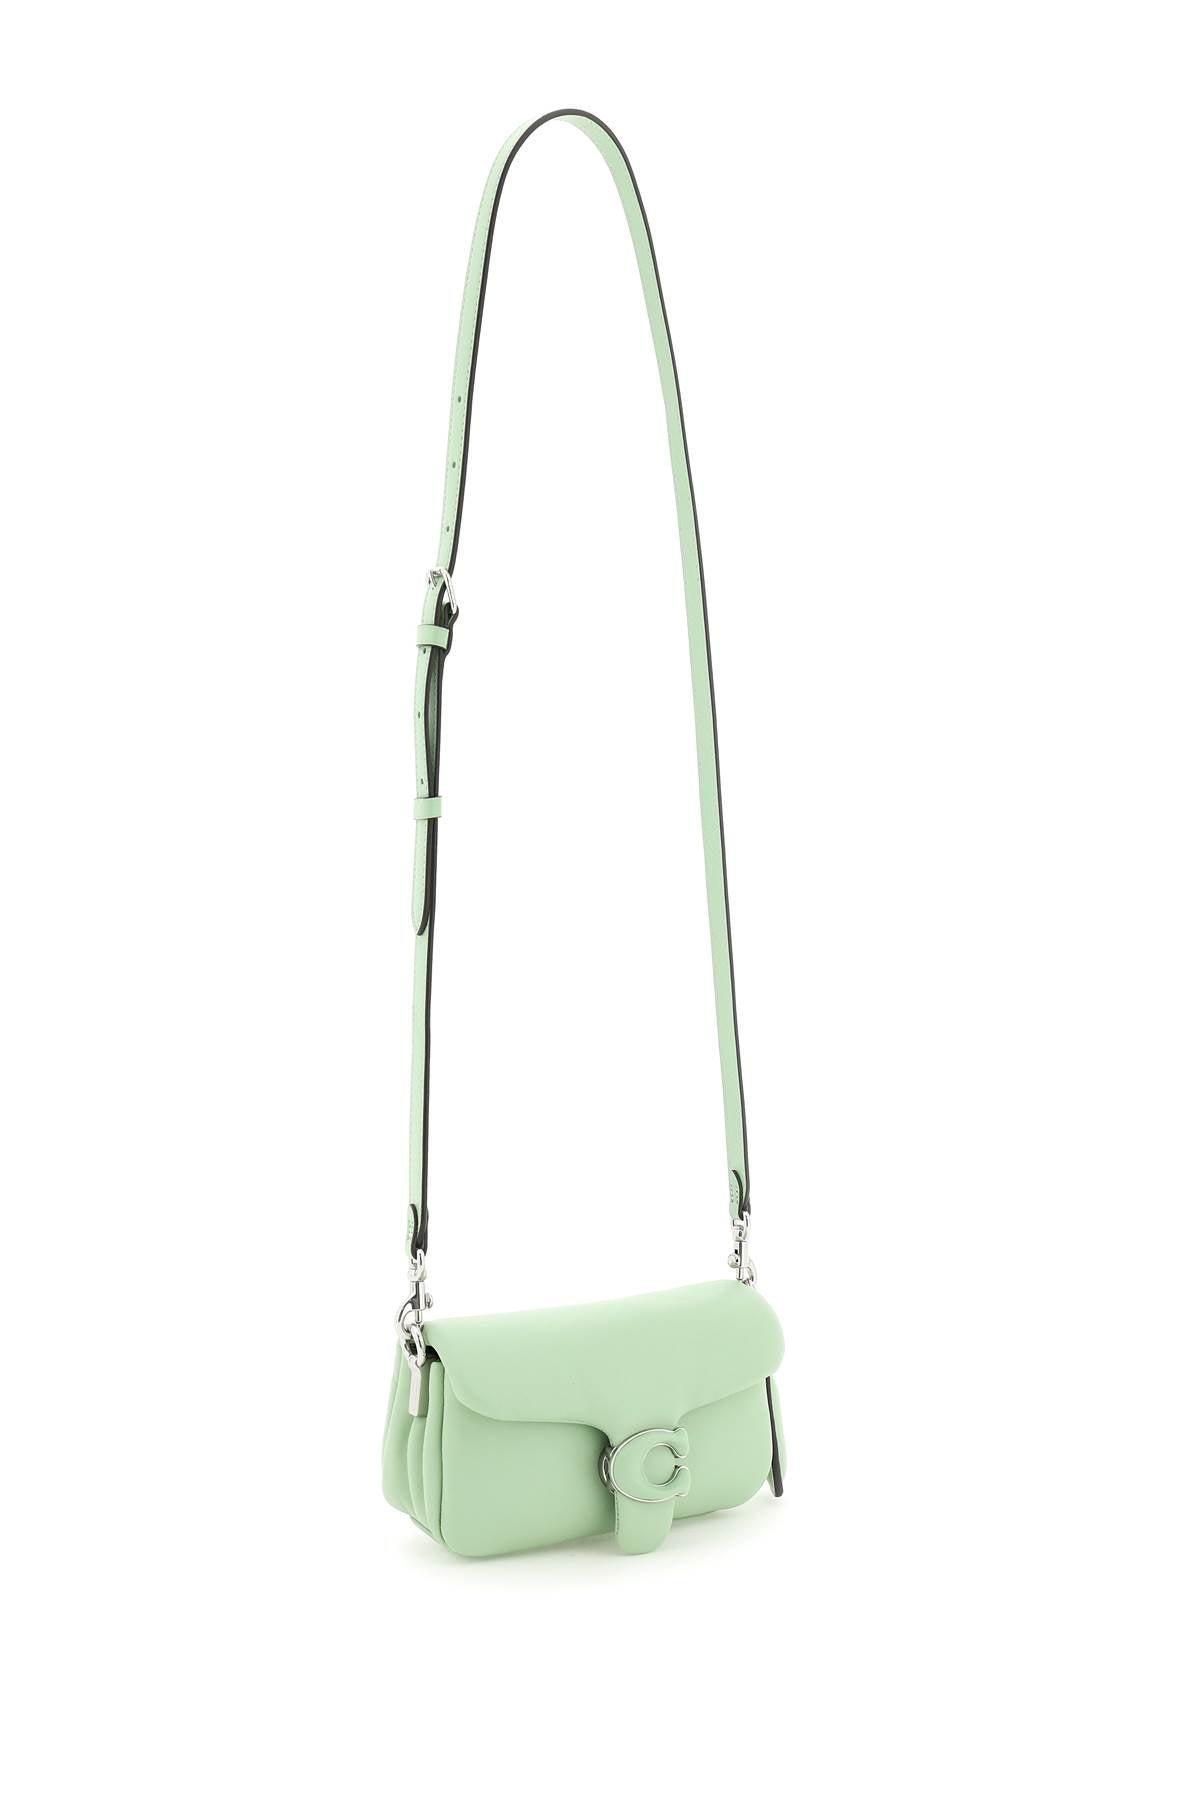 Coach lime green handbag with white leather straps.